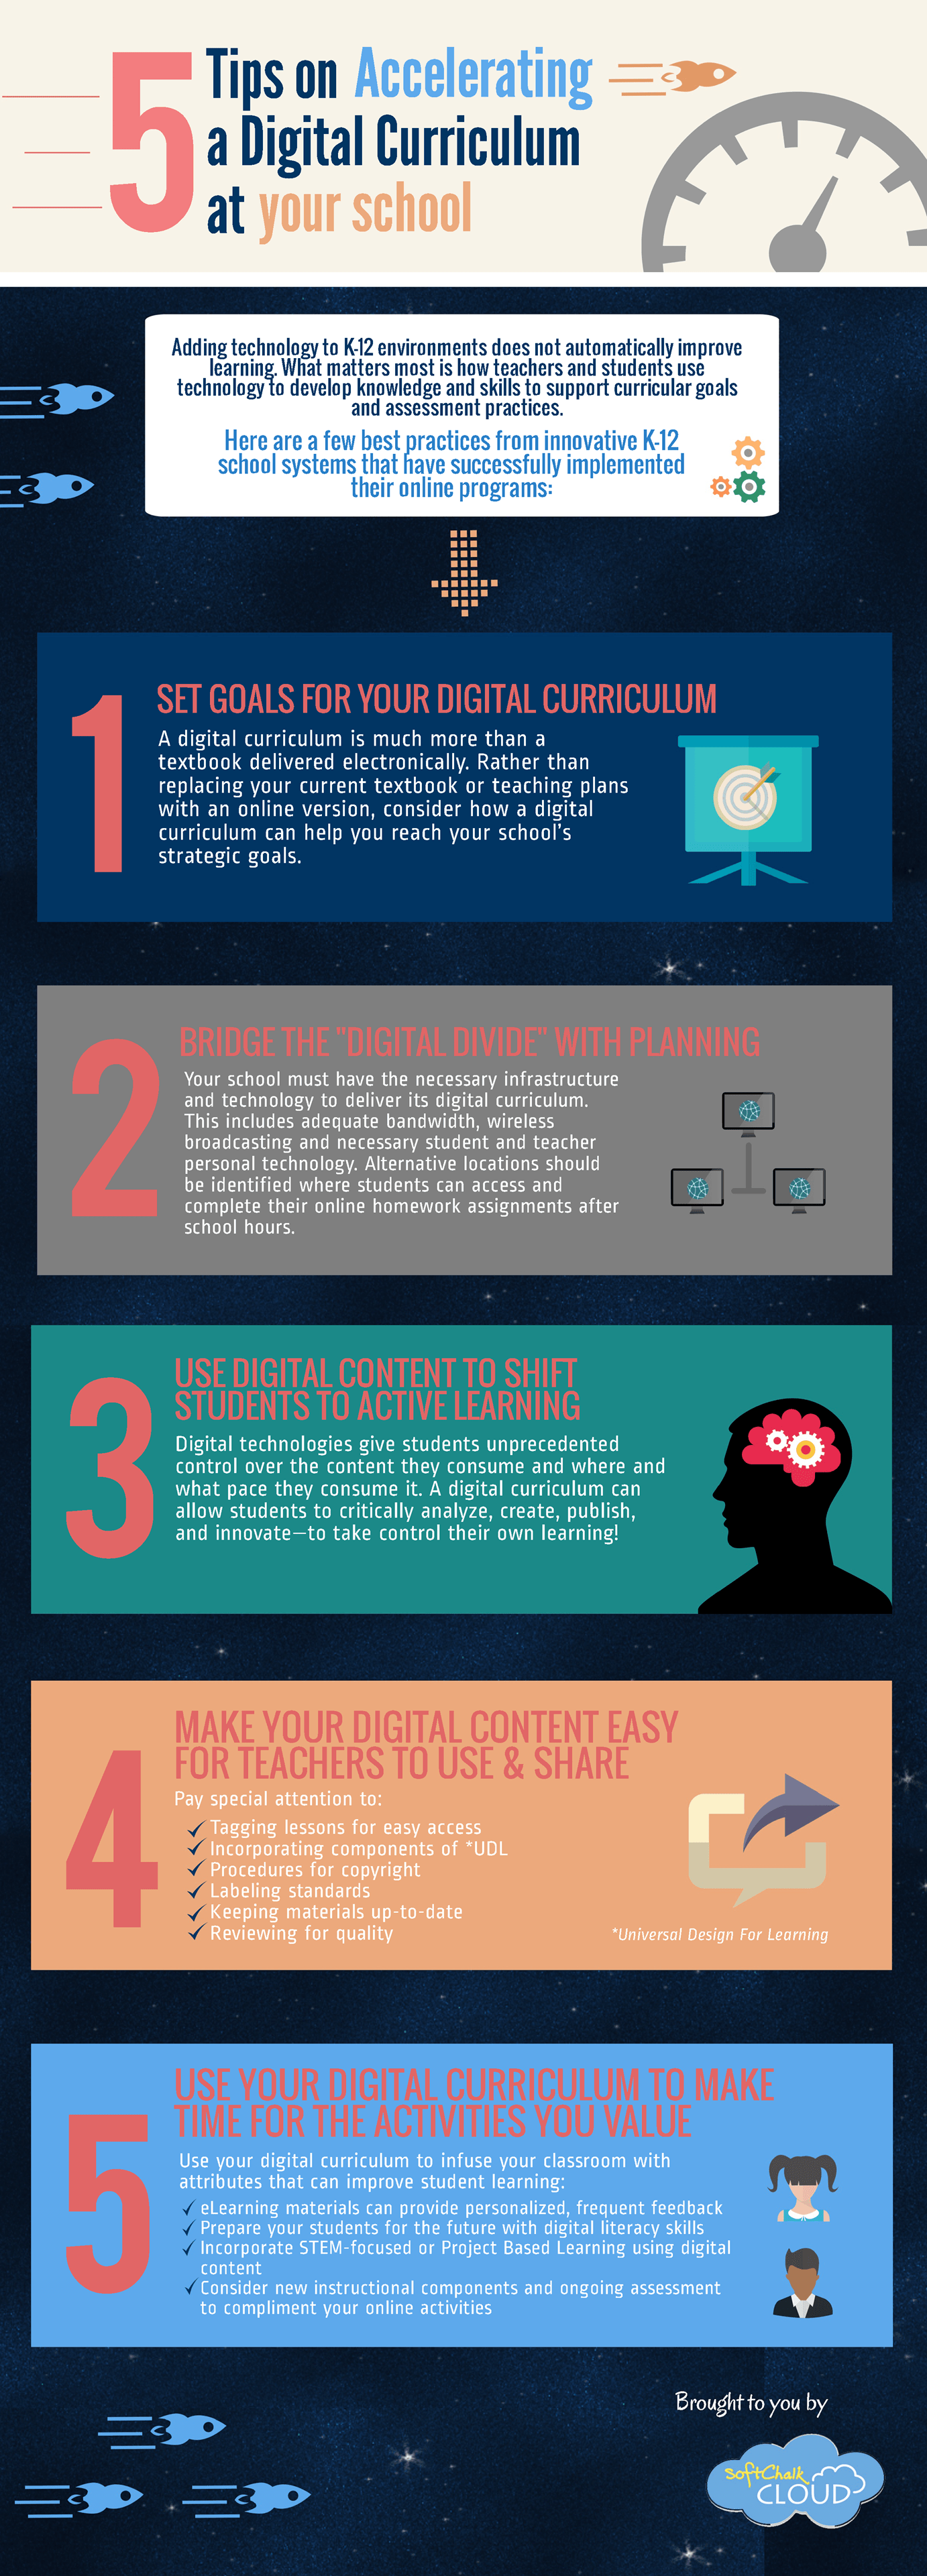 Tips on Accelerating a Digital Curriculum in Your School Infographic